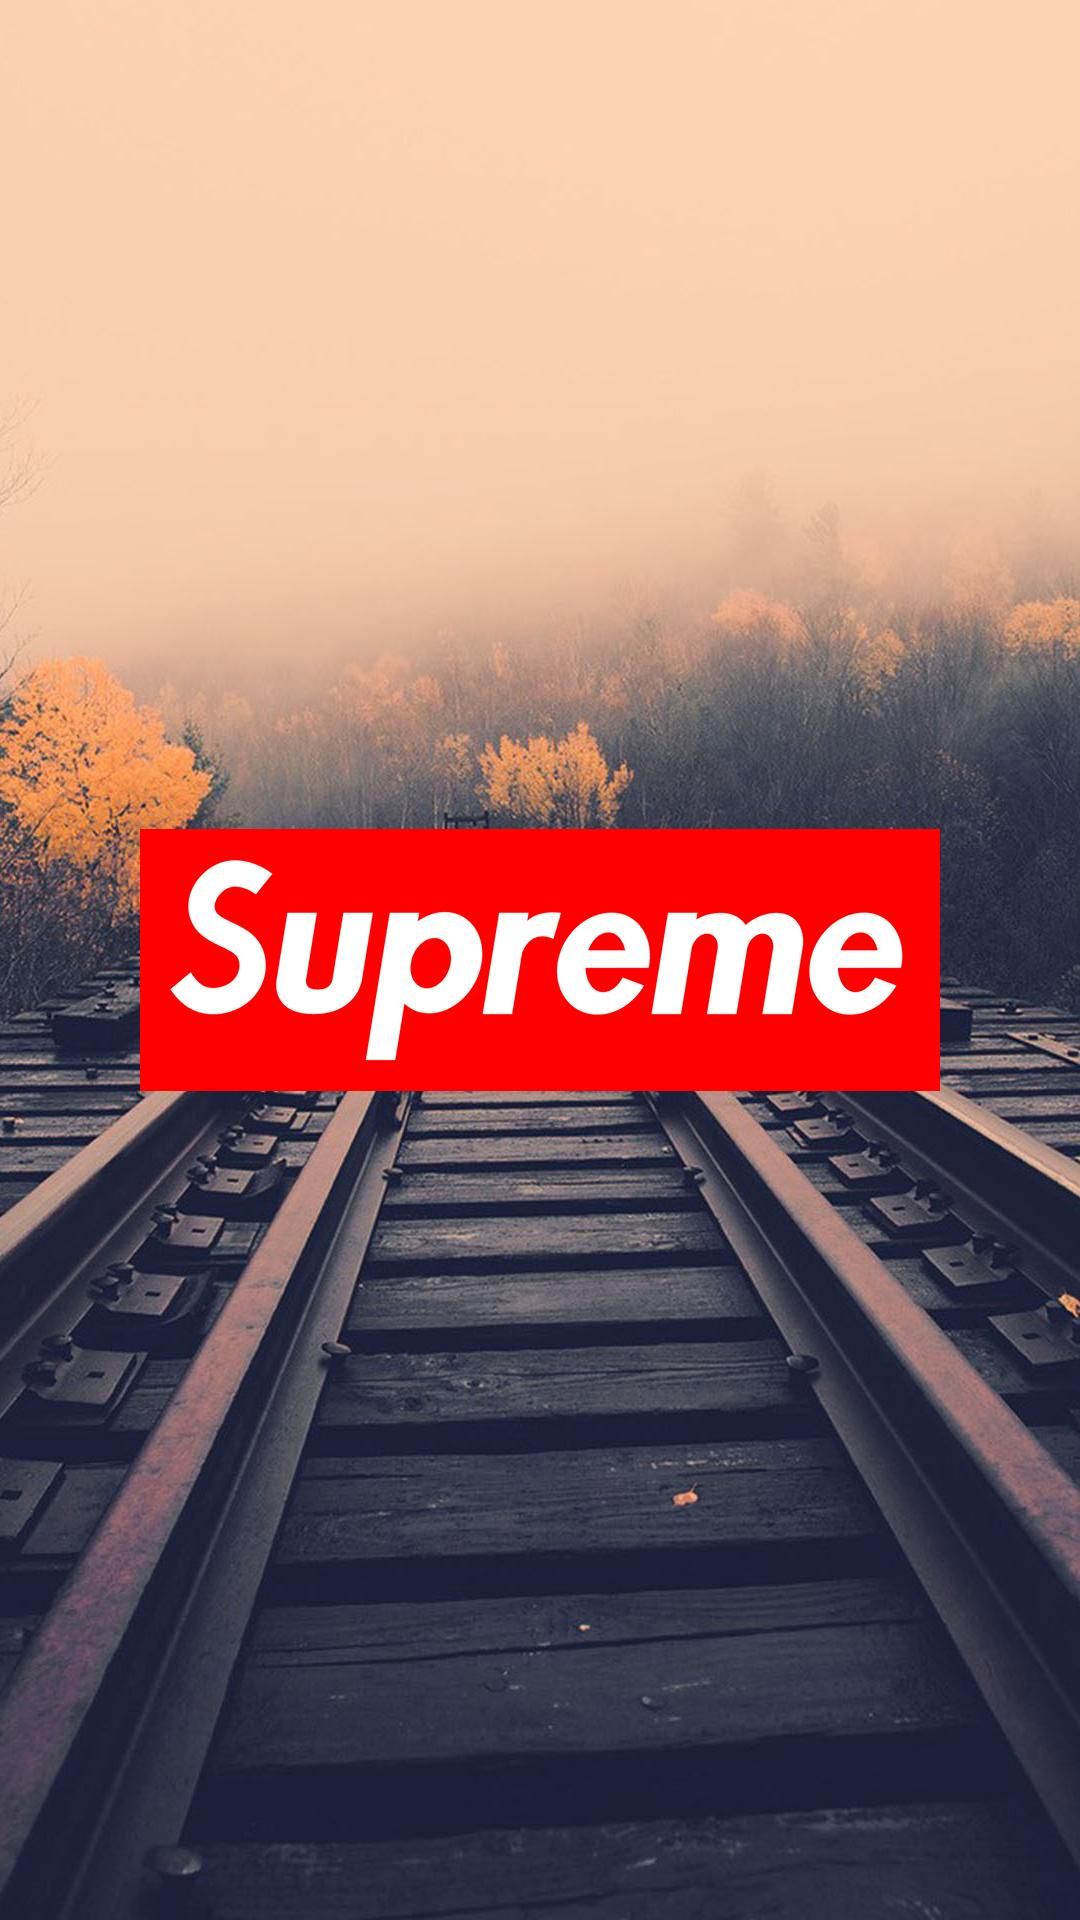 Supreme Apple iPhone Plus HD Wallpaper Available For